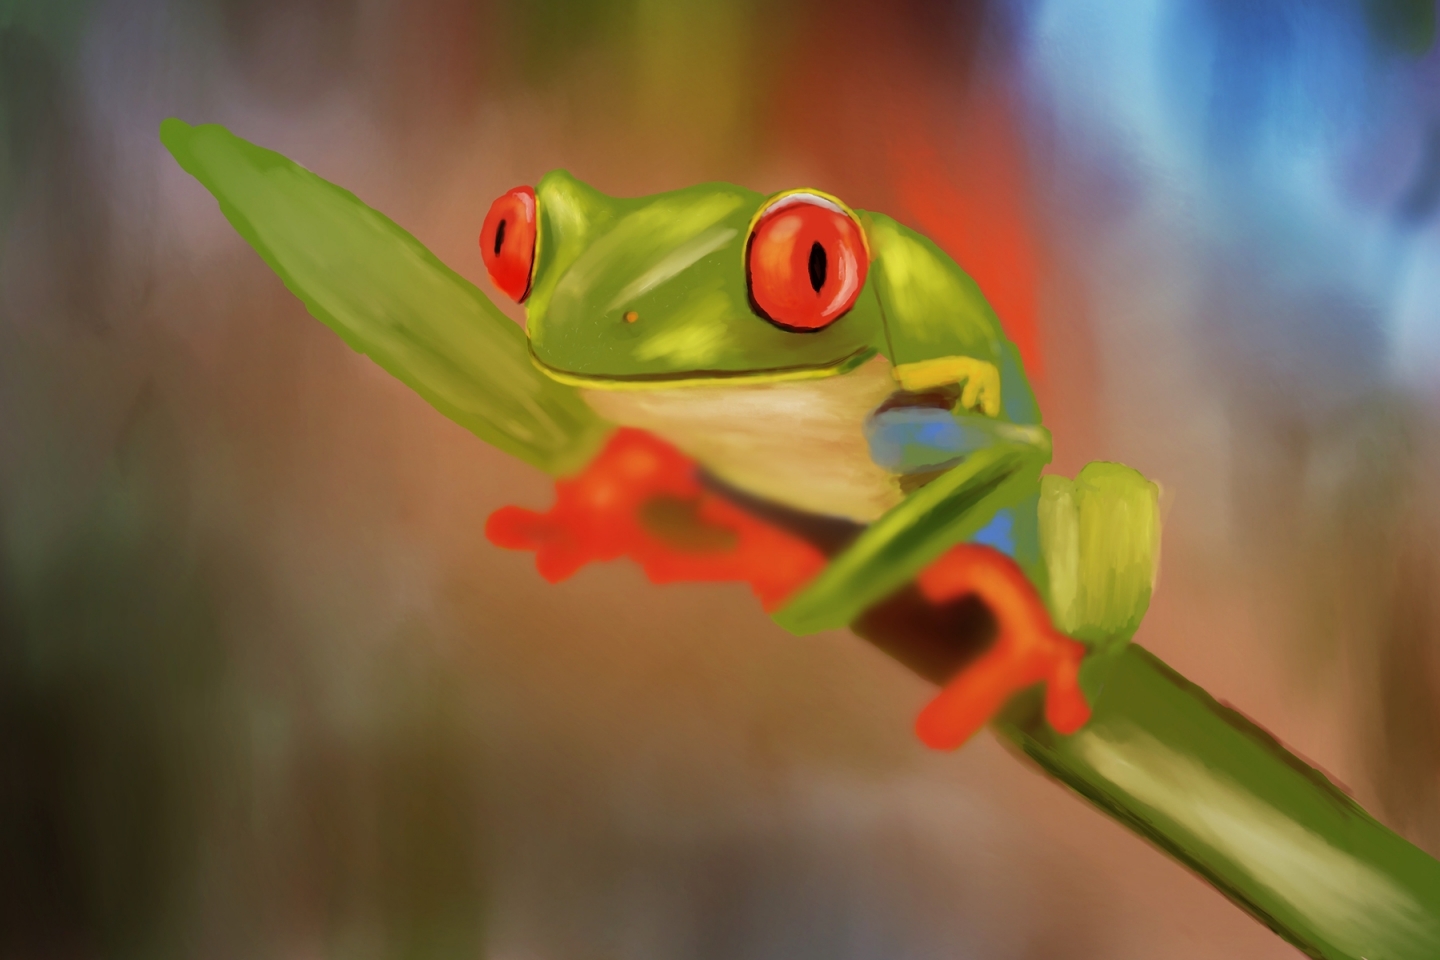 A frog drawn in procreate on an ipad with the aid of a tutorial from flo...@floortjesart
#procreate #frog